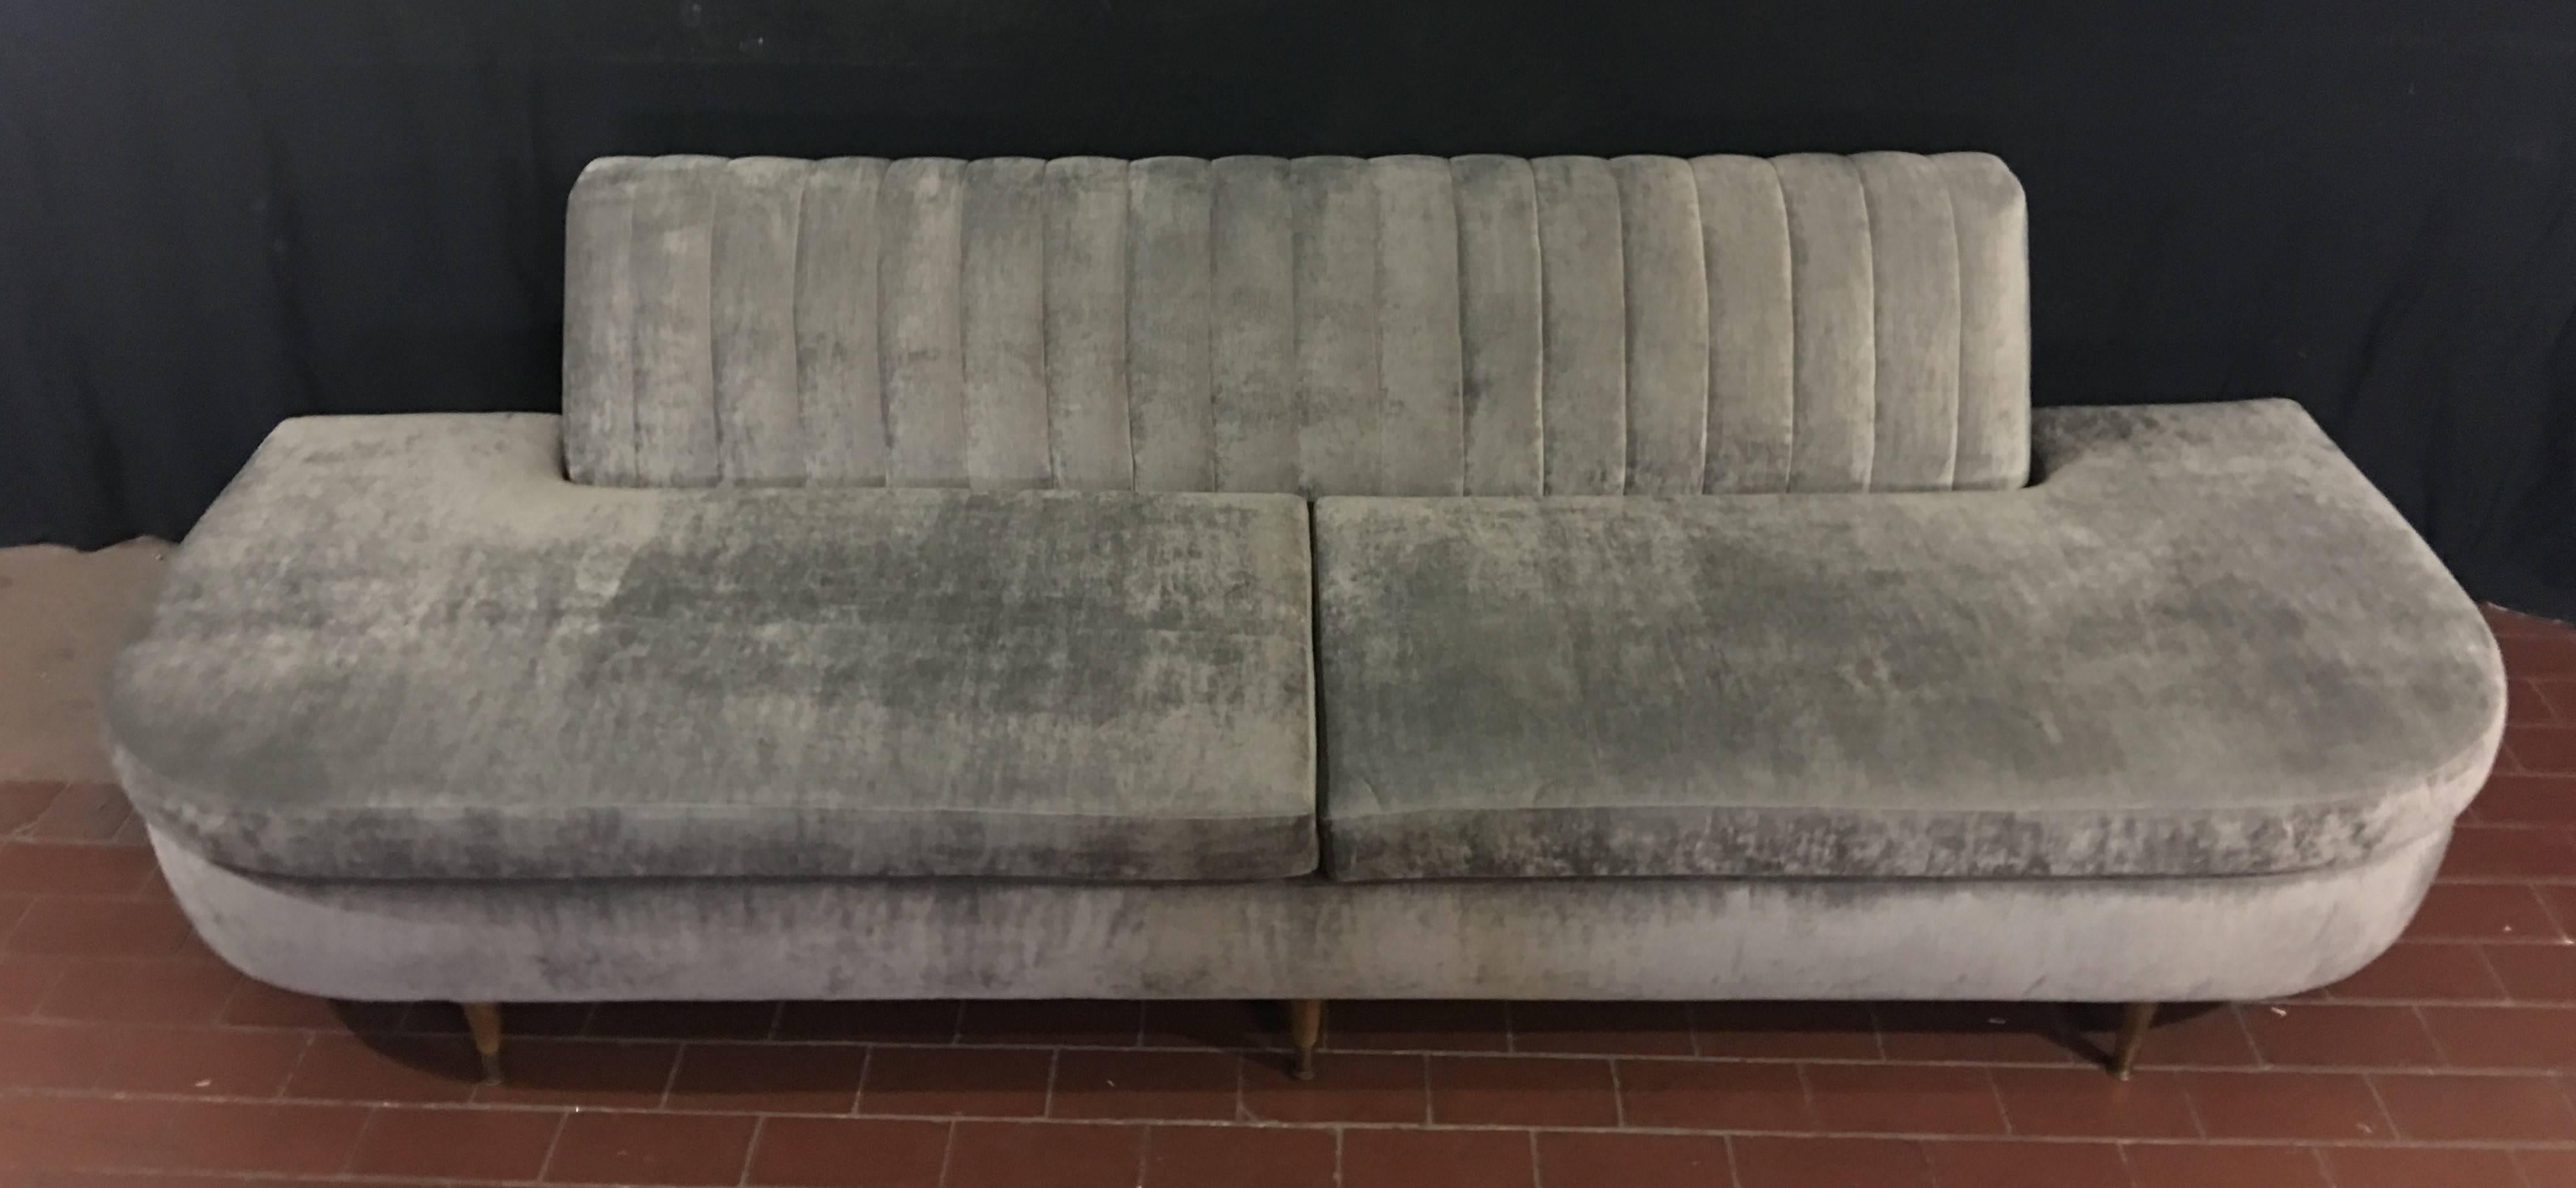 Newly refurbished and reupholstered Vintage midcentury sofa. Covered in a soft pale green velvet this midcentury sofa is as stylish as it is comfortable. In keeping with the style of the period in which it was created, the seating composition is